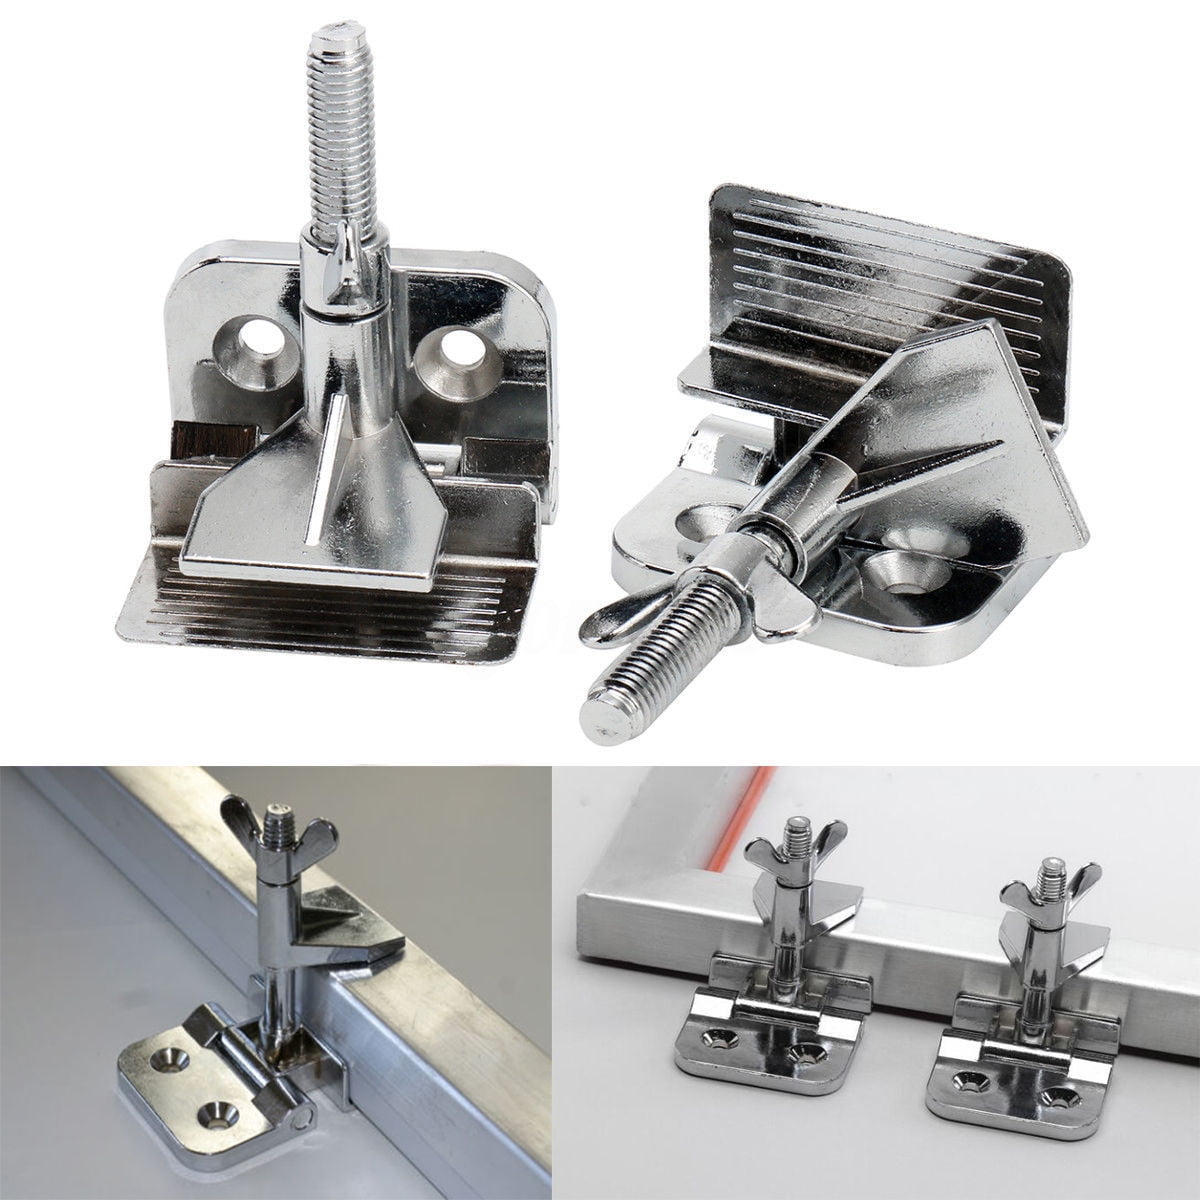 YTFLOT Screen Printing Hinge Clamps 2Pcs of Screen Frame Butterfly for Silk Screen Printing Press Include Four Screws 